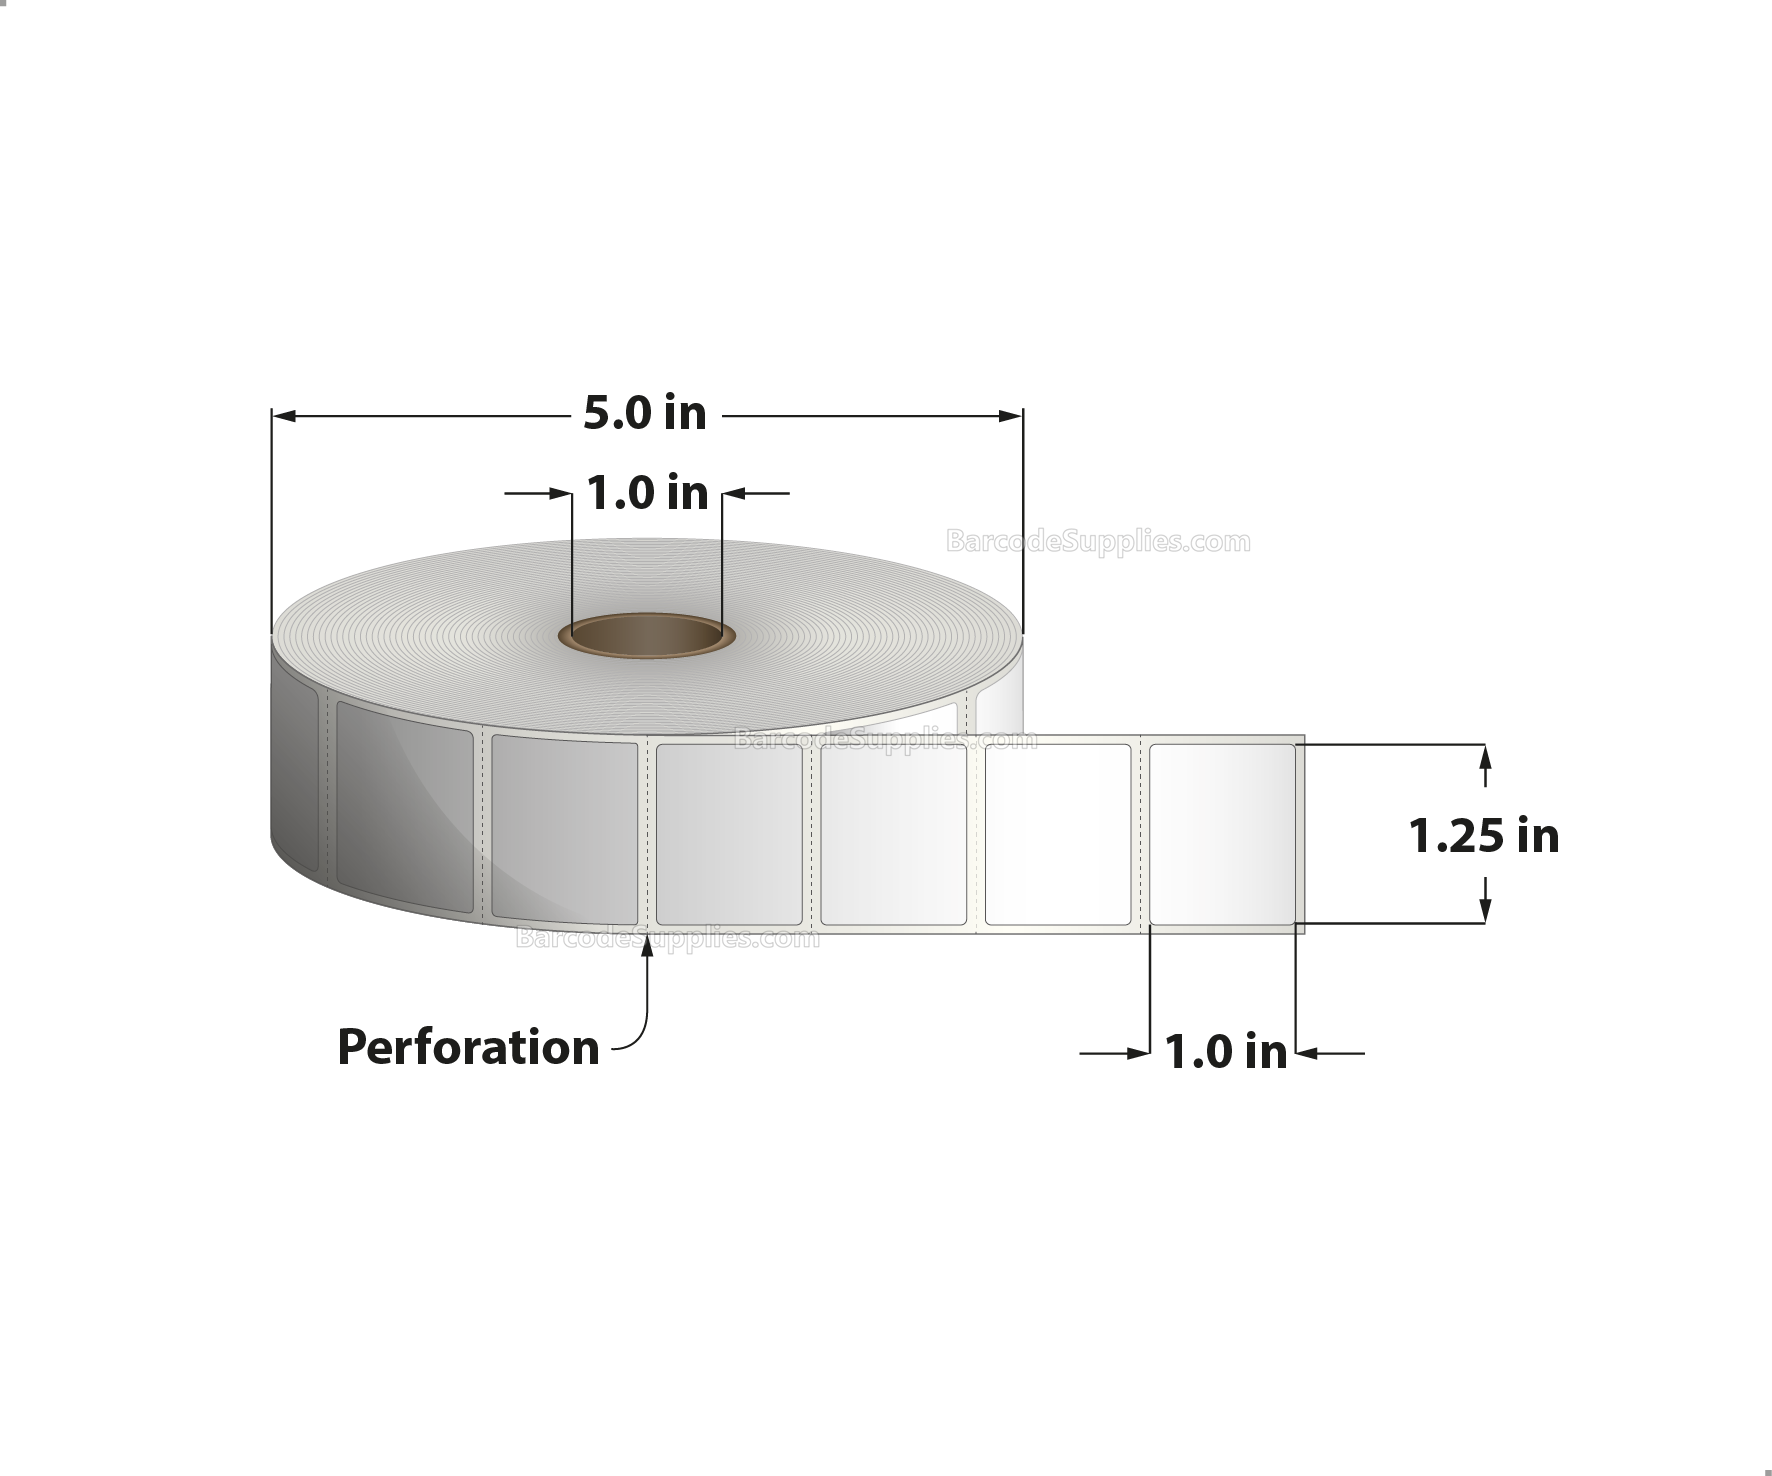 1.25 x 1 Direct Thermal White Labels With Rubber Adhesive - Perforated - 2340 Labels Per Roll - Carton Of 12 Rolls - 28080 Labels Total - MPN: RDT5-125100-1P